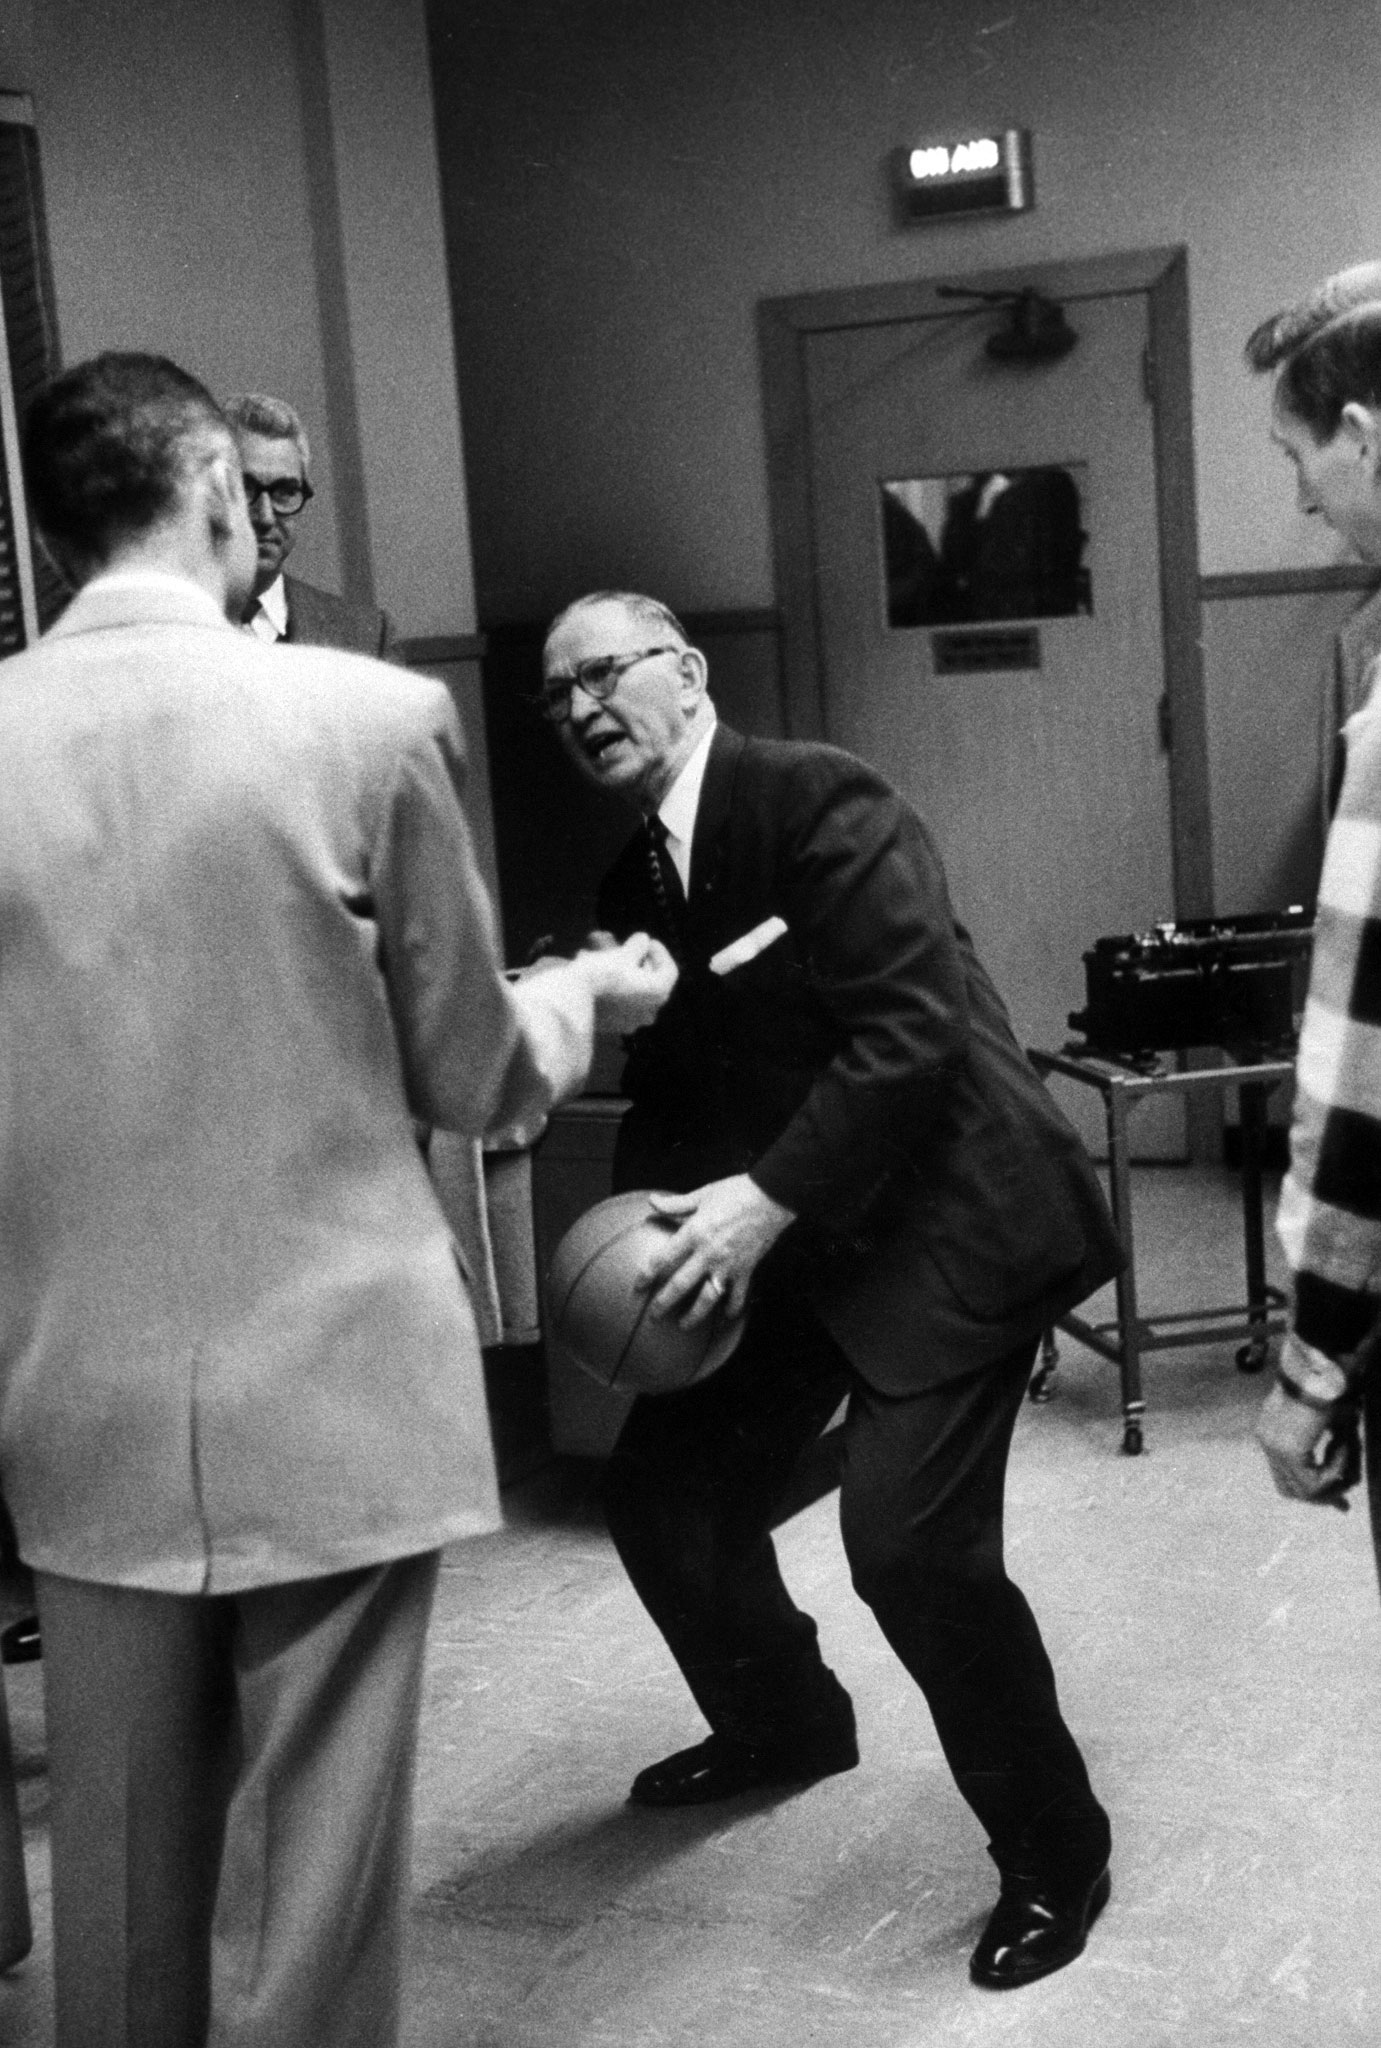 The legendary Kansas coach Forrest Allen, nicknamed "Phog," is often referred to as the "Father of Basketball Coaching," although these days not too many people mention him when discussing the greatest college coaches in history. Allen (here demonstrating some sort of funky move in 1957) coached Dean Smith; he recruited Wilt Chamberlain to Kansas; the Jayhawks' famous Allen Fieldhouse is named for him, and a banner hanging in the fieldhouse reads, "Pay heed all who enter, beware of the Phog."